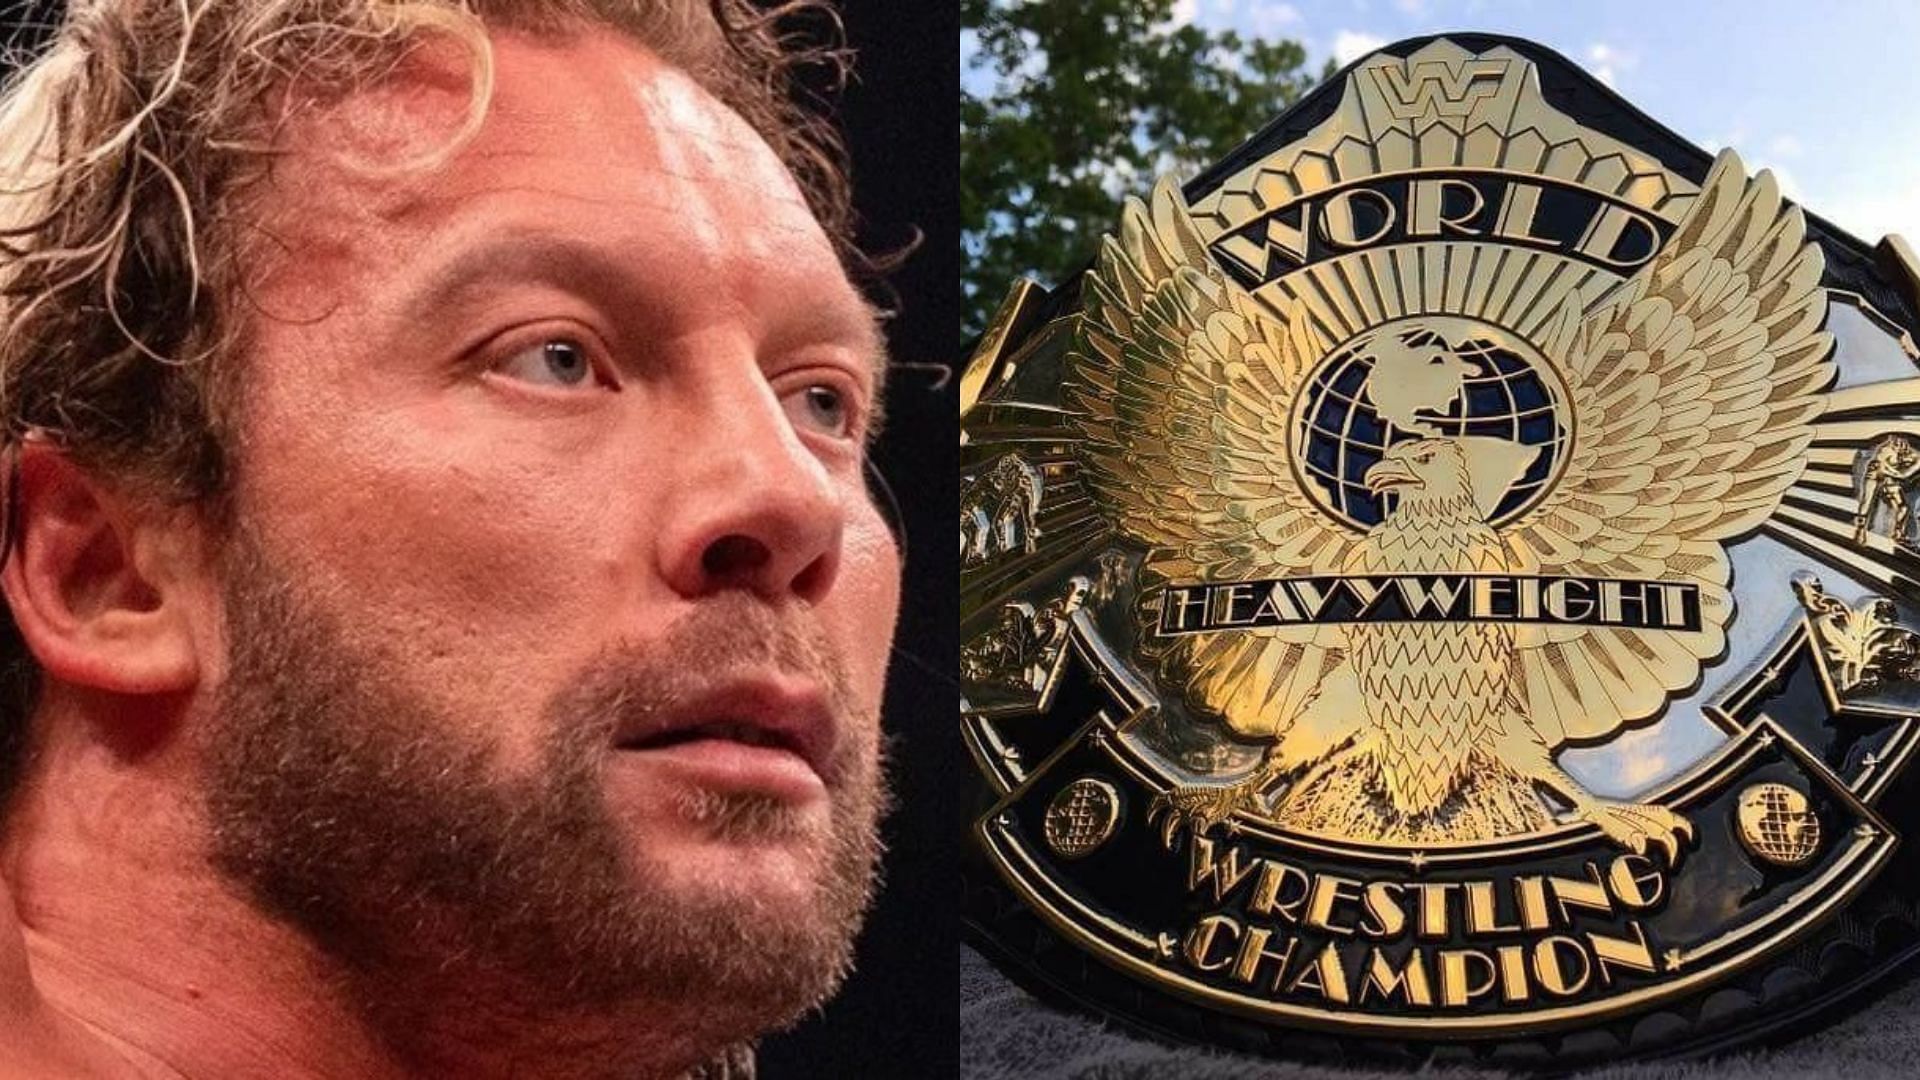 Kenny Omega is currently signed to AEW